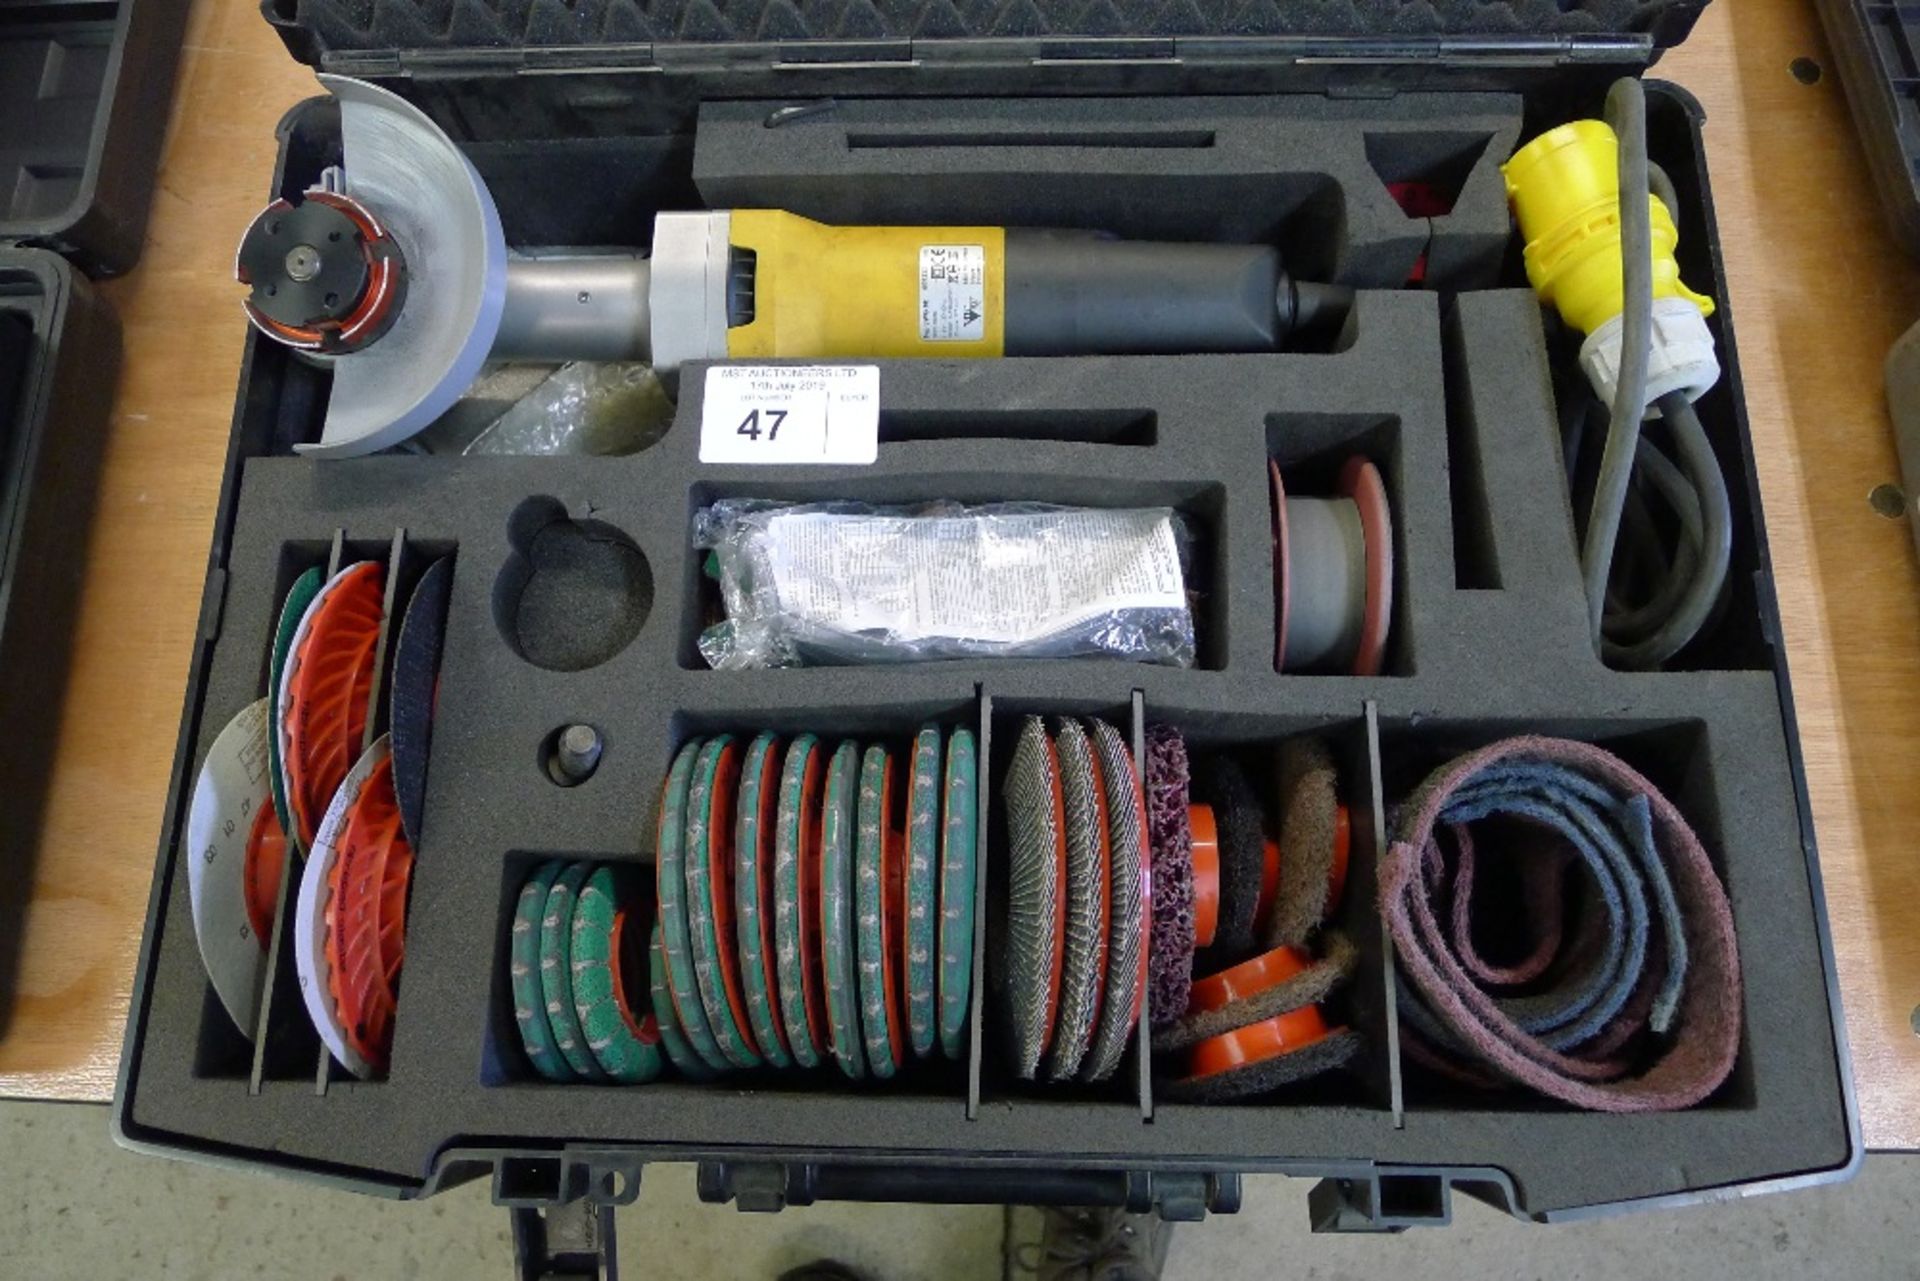 1 pre-weld cleaner / polisher by Siastar type UWG 8R, 110v supplied in plastic carry case with - Image 3 of 5